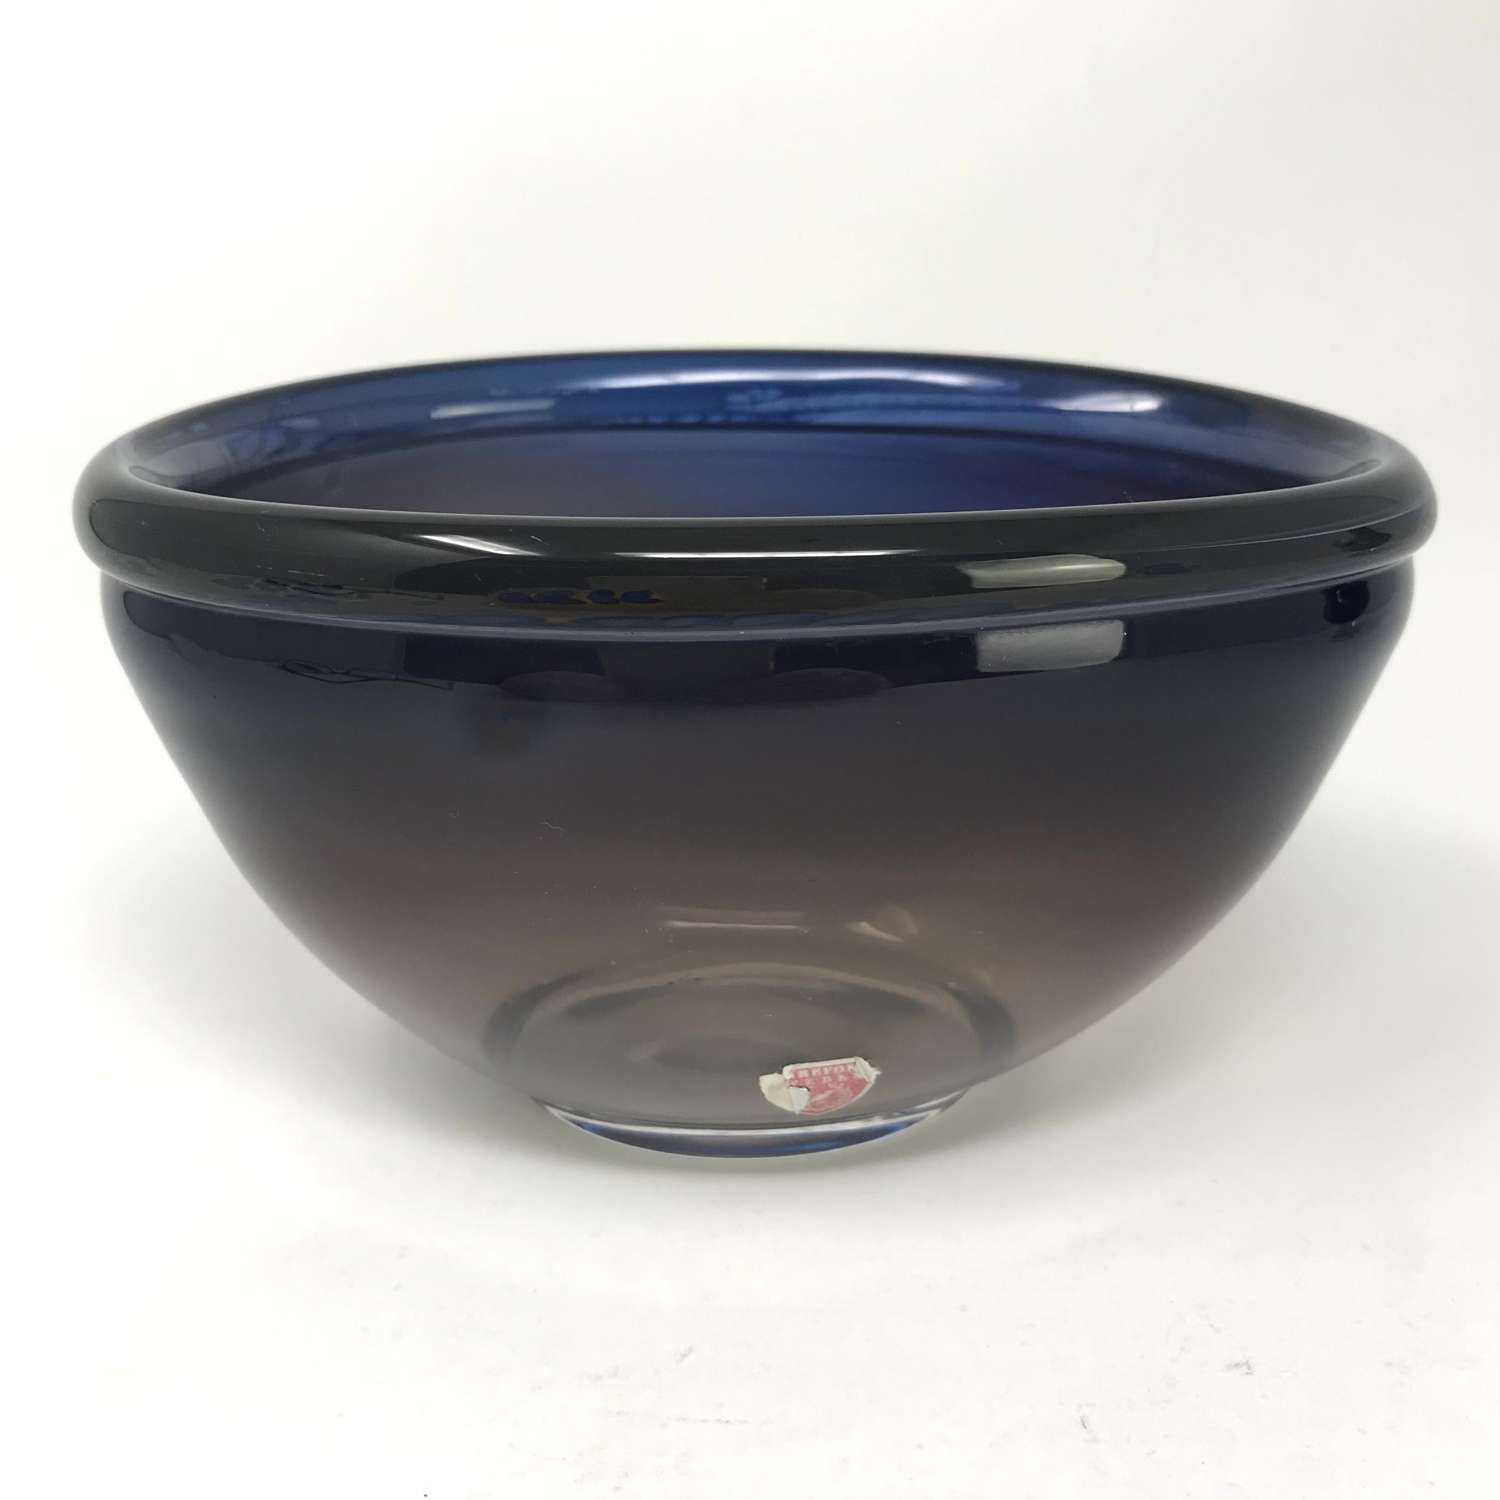 Nils Landberg Expo bowl in brown and blue